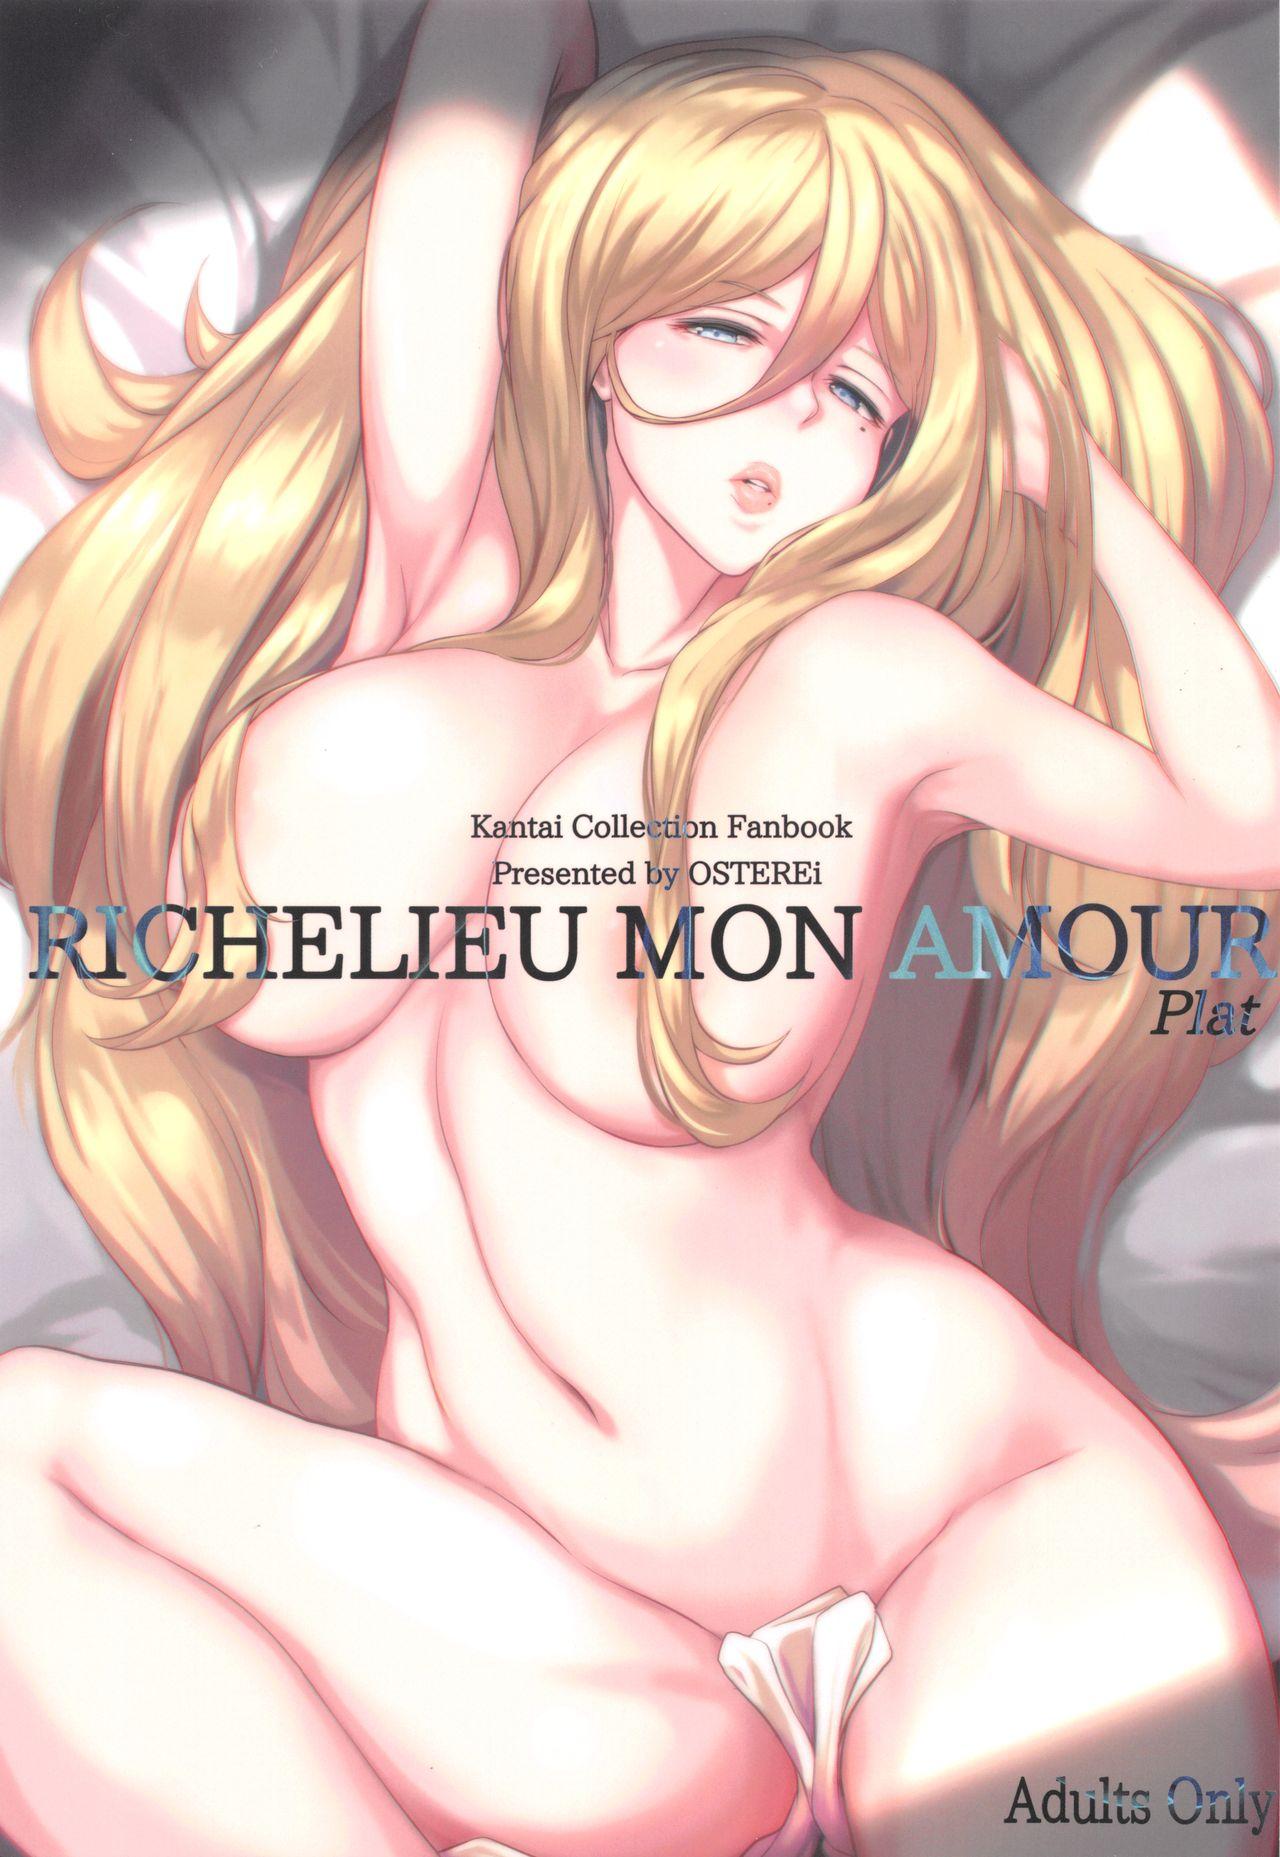 Cocksucking RICHELIEU MON AMOUR Plat - Kantai collection 3some - Page 1